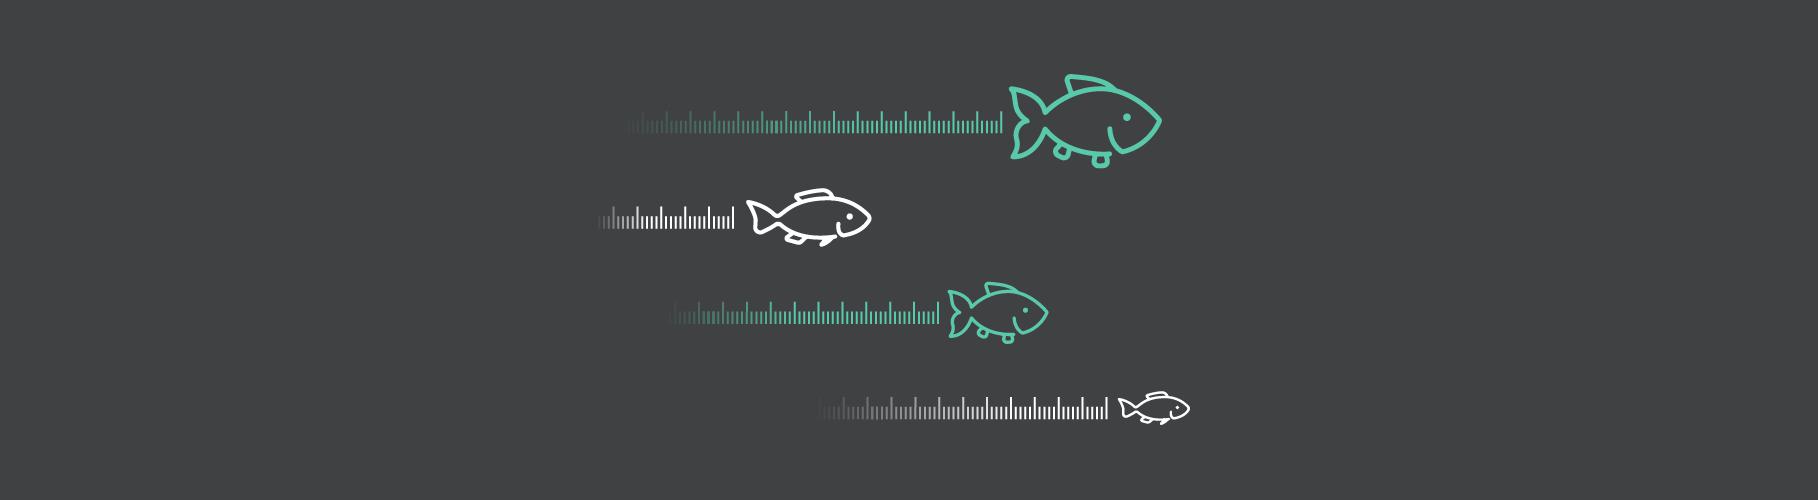 TopIC Banner - 6 tips for mastering measurement